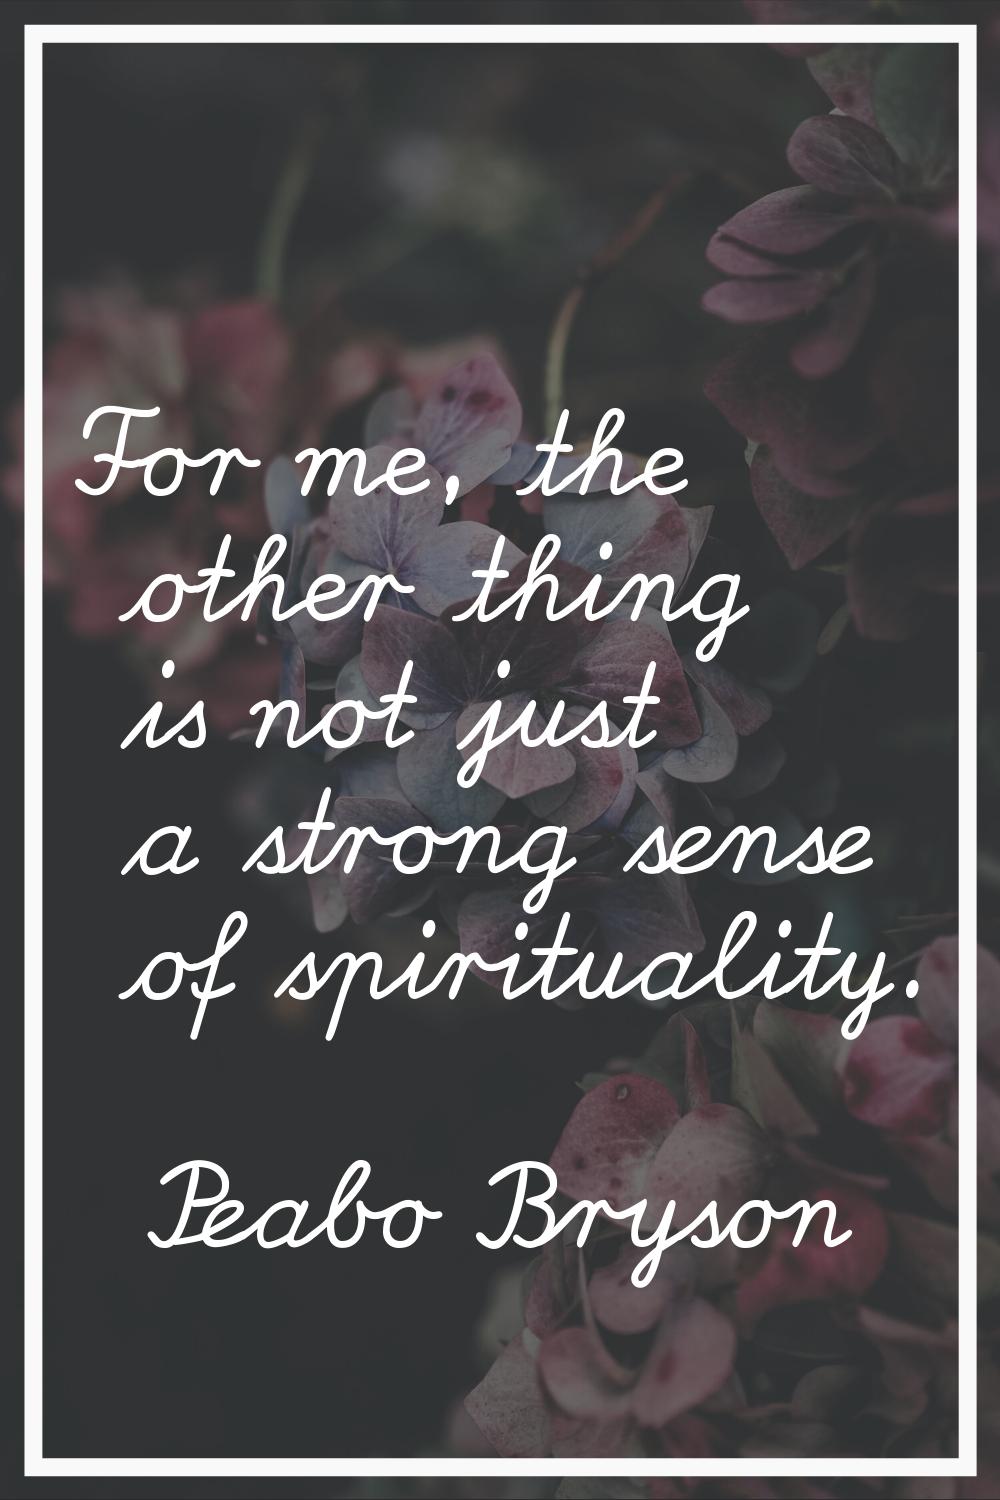 For me, the other thing is not just a strong sense of spirituality.